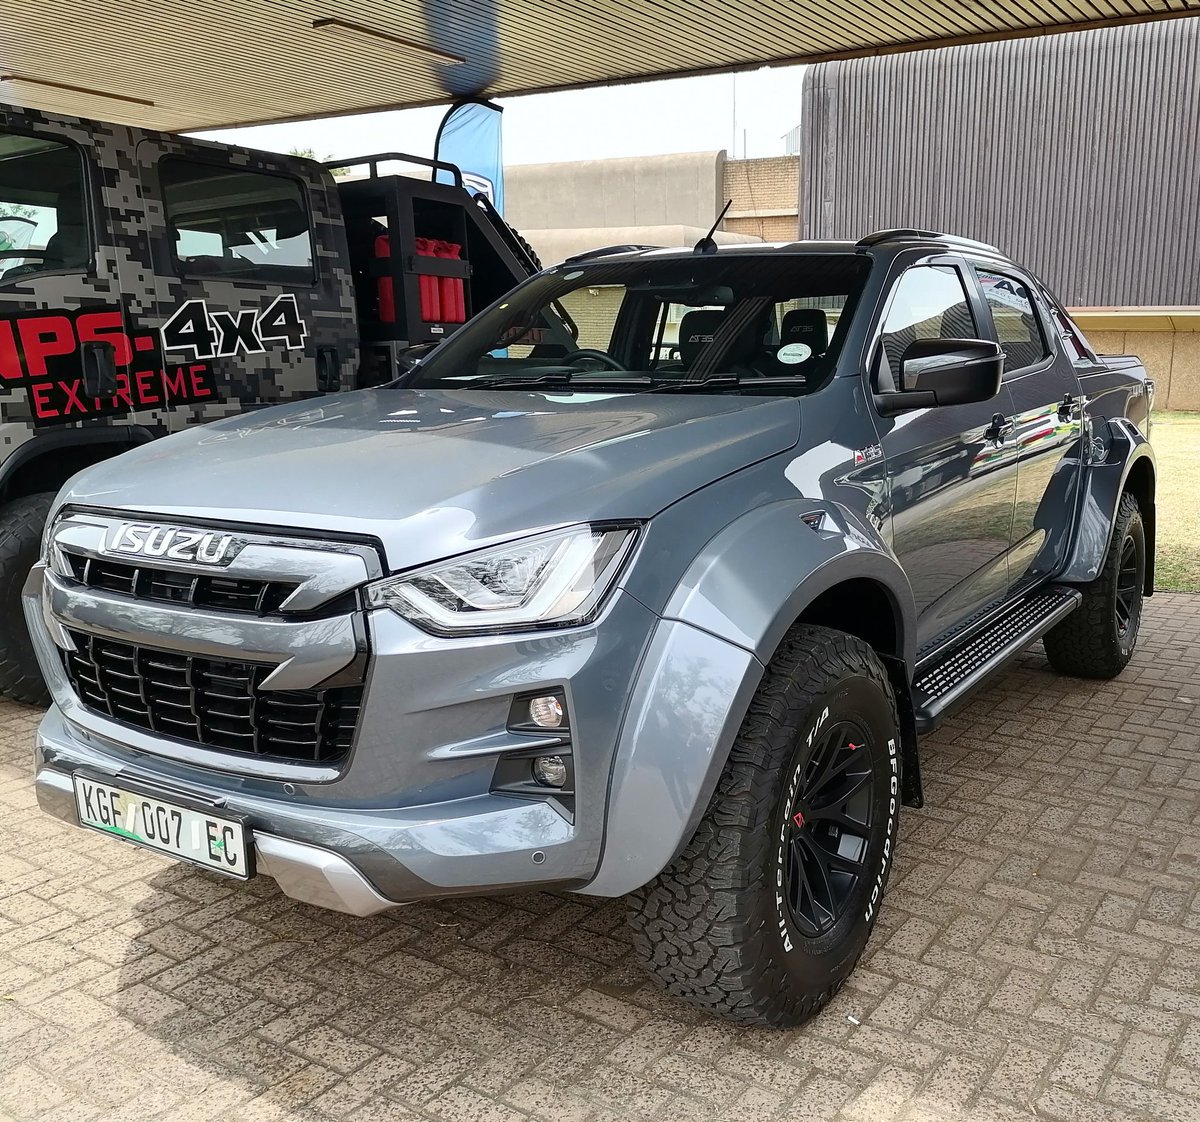 Beast mode activated with the @isuzusa D-MAX AT35
It's a #DMAXThing #AT35 #ExploreWithoutLimits #ArcticTrucks